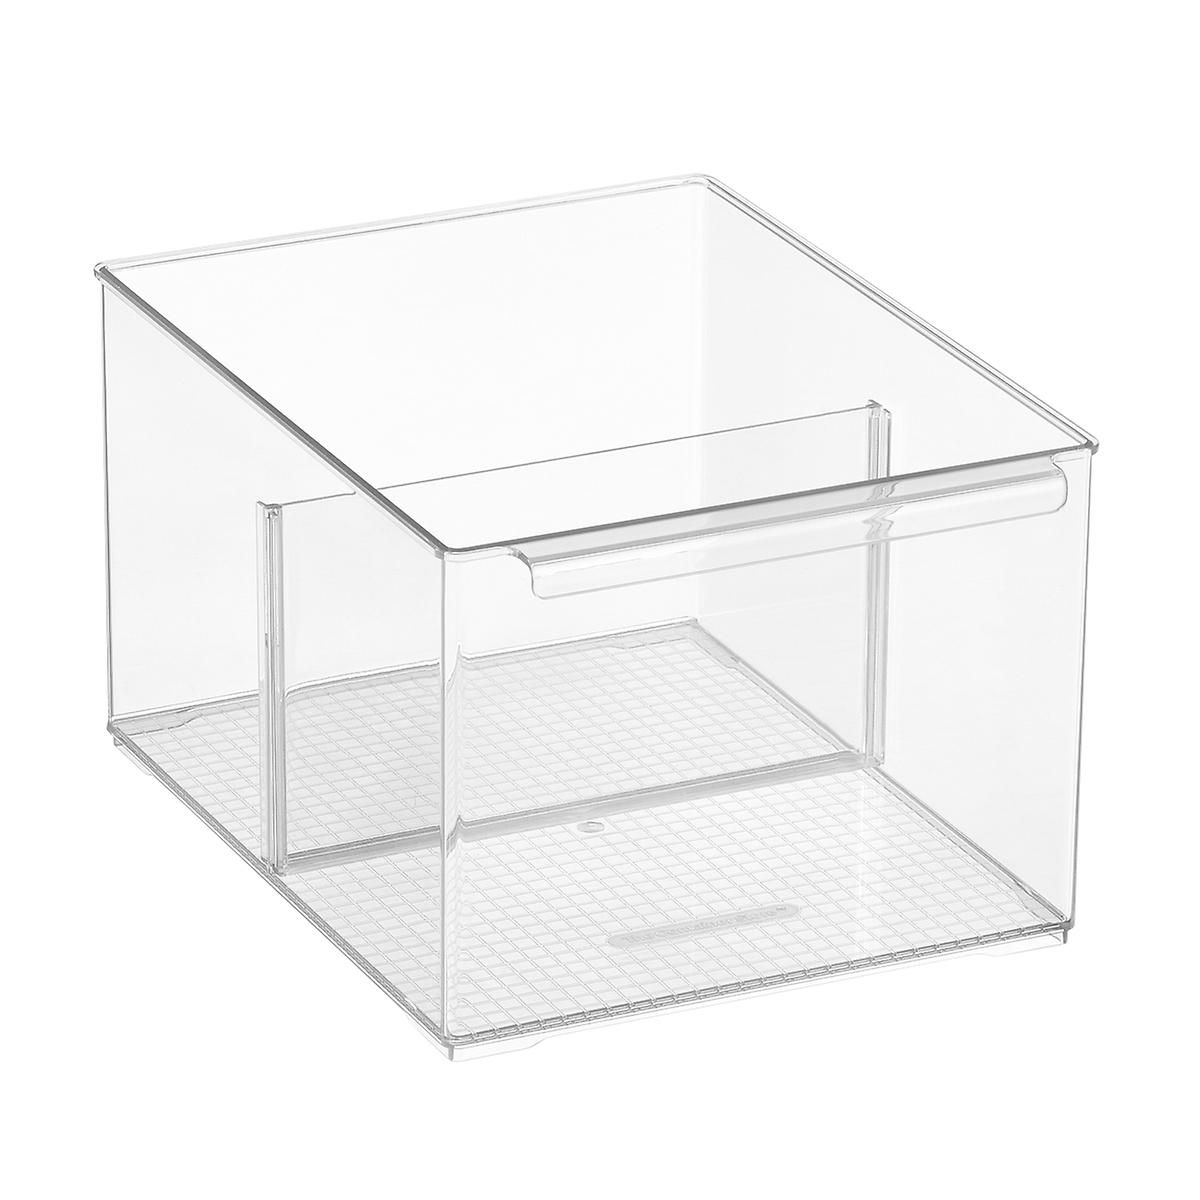 The Everything Organizer Medium Cabinet Depth Pantry Bin w/ Divider | The Container Store